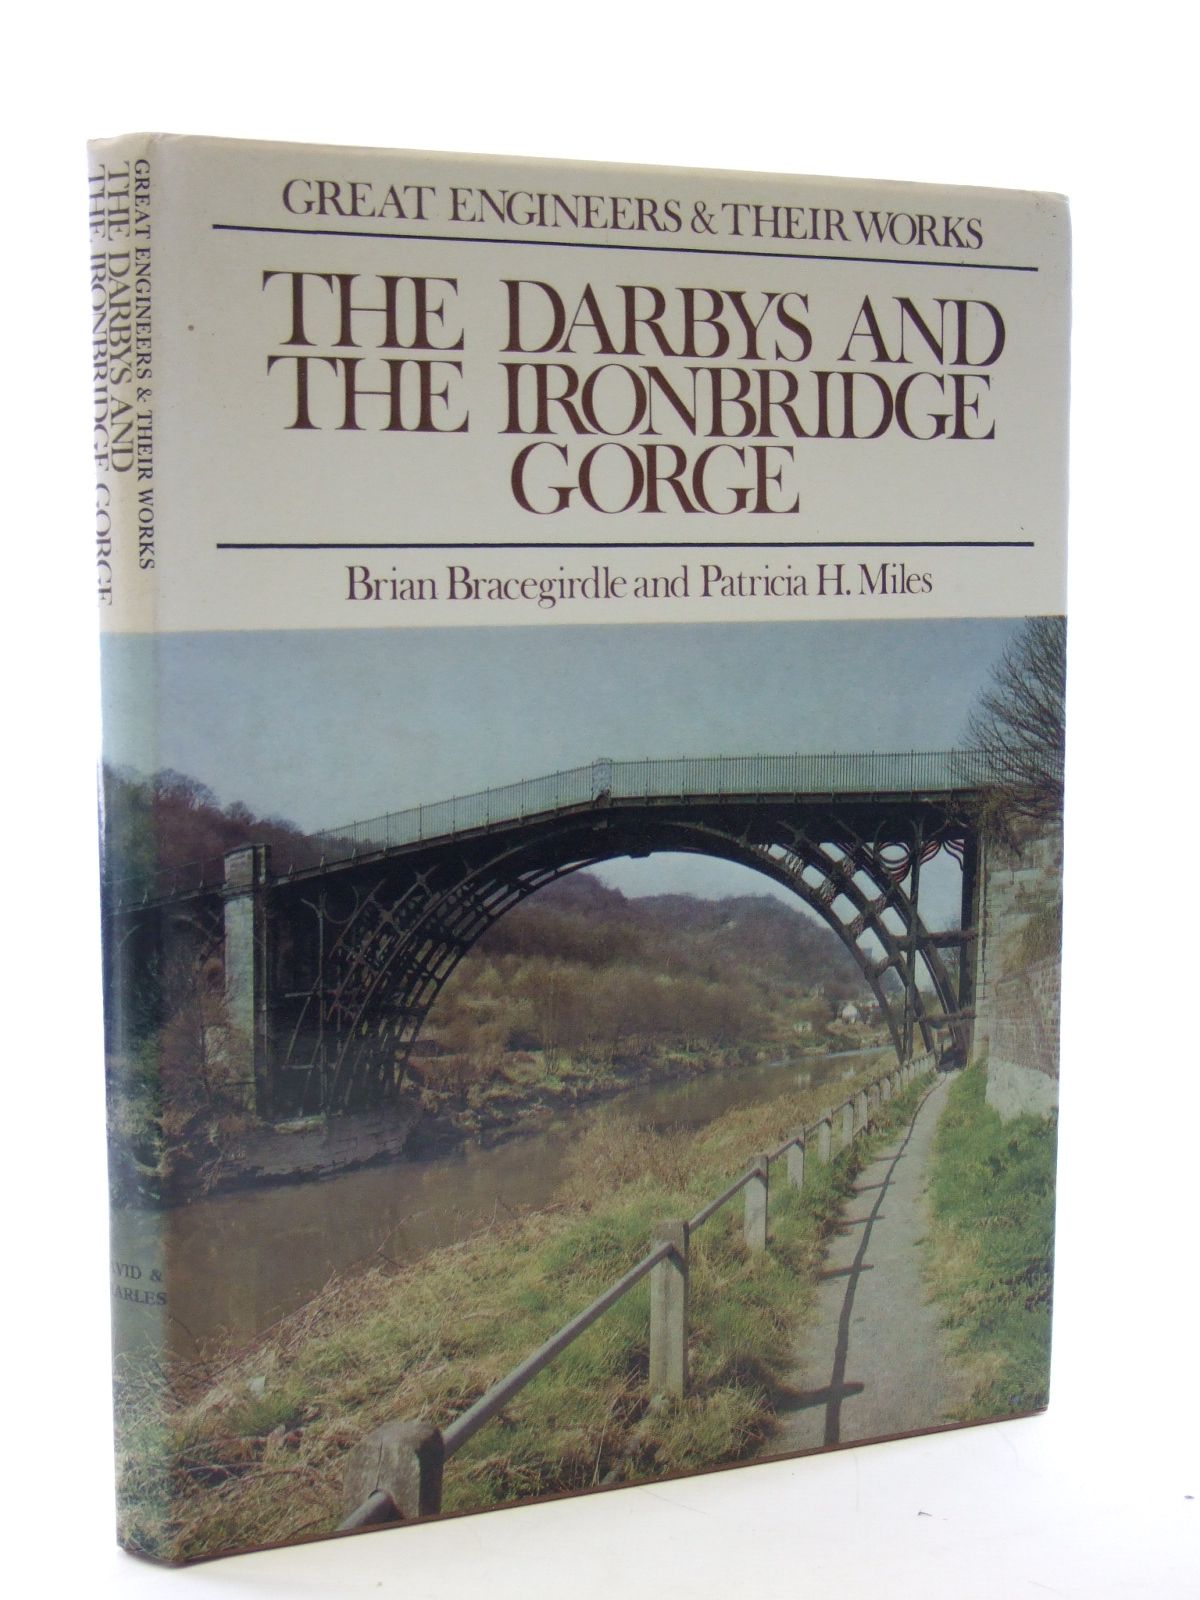 Photo of THE DARBYS AND THE IRONBRIDGE GORGE written by Bracegirdle, Brian
Miles, Patricia H. published by David & Charles (STOCK CODE: 1603280)  for sale by Stella & Rose's Books